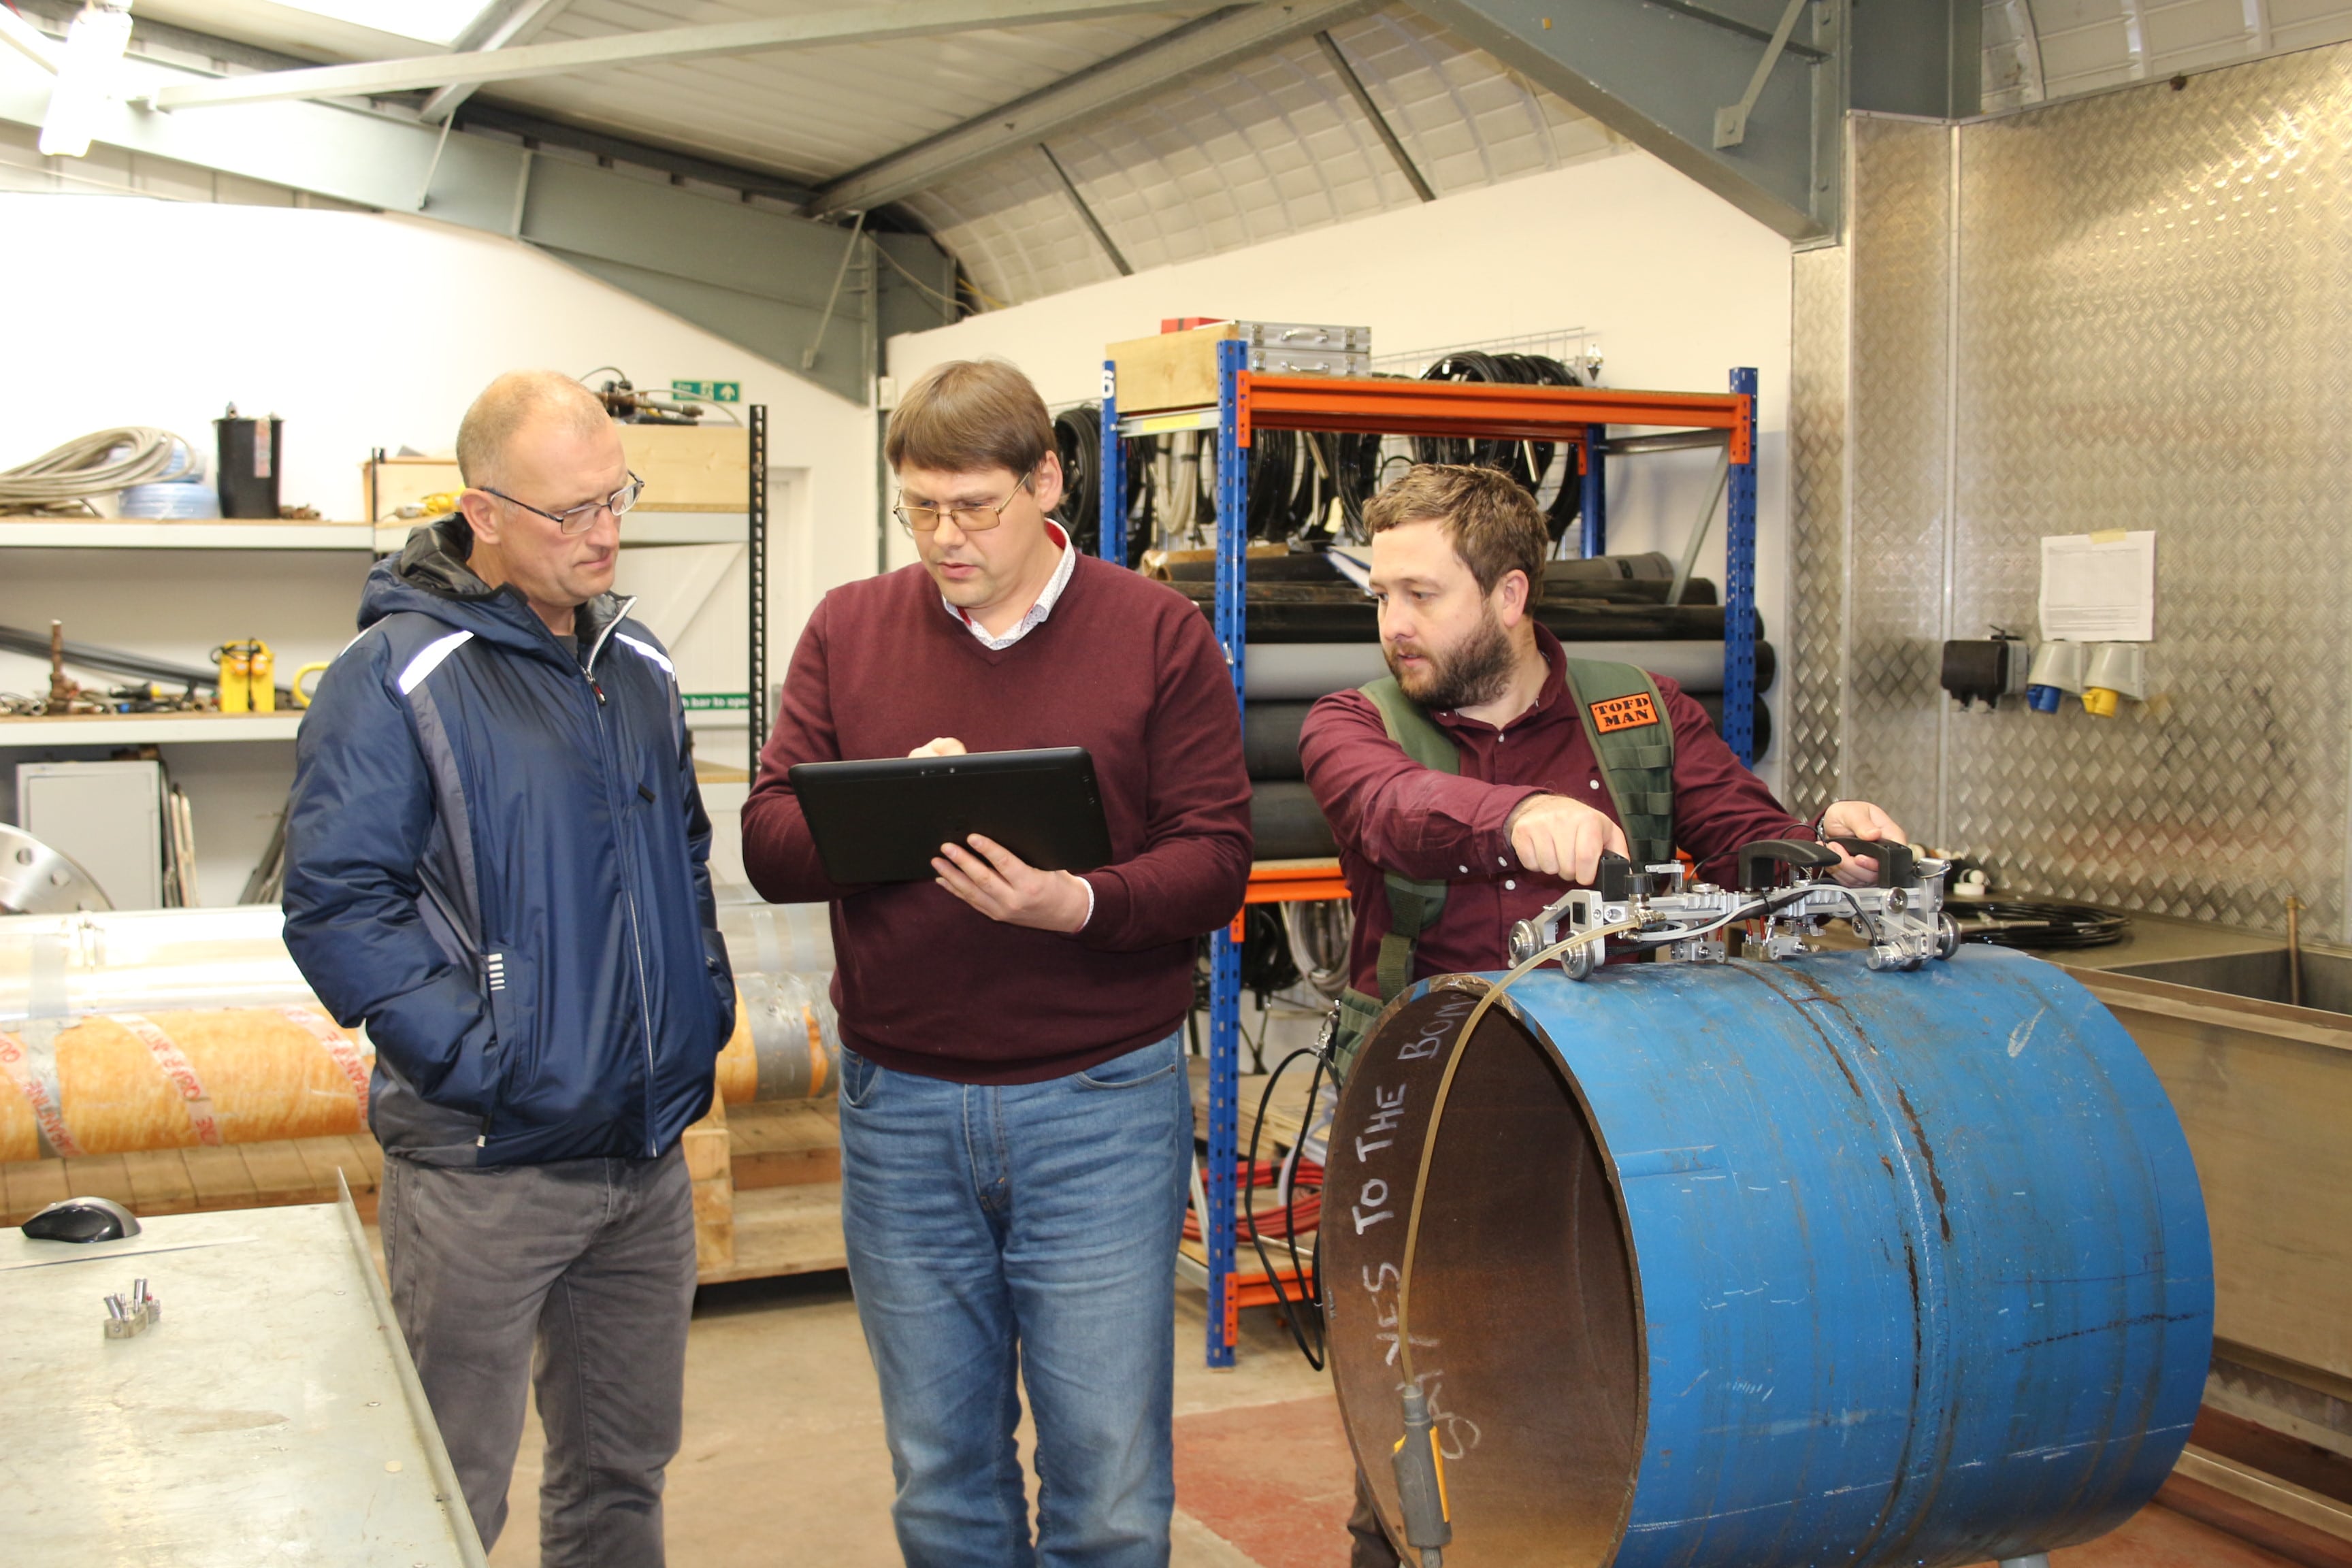 OKOndt Group's expert explains the results of testing of the pipe welded joint sample with the TOFD-Man Wireless System – presentation for British colleagues, Swansea, December 2017